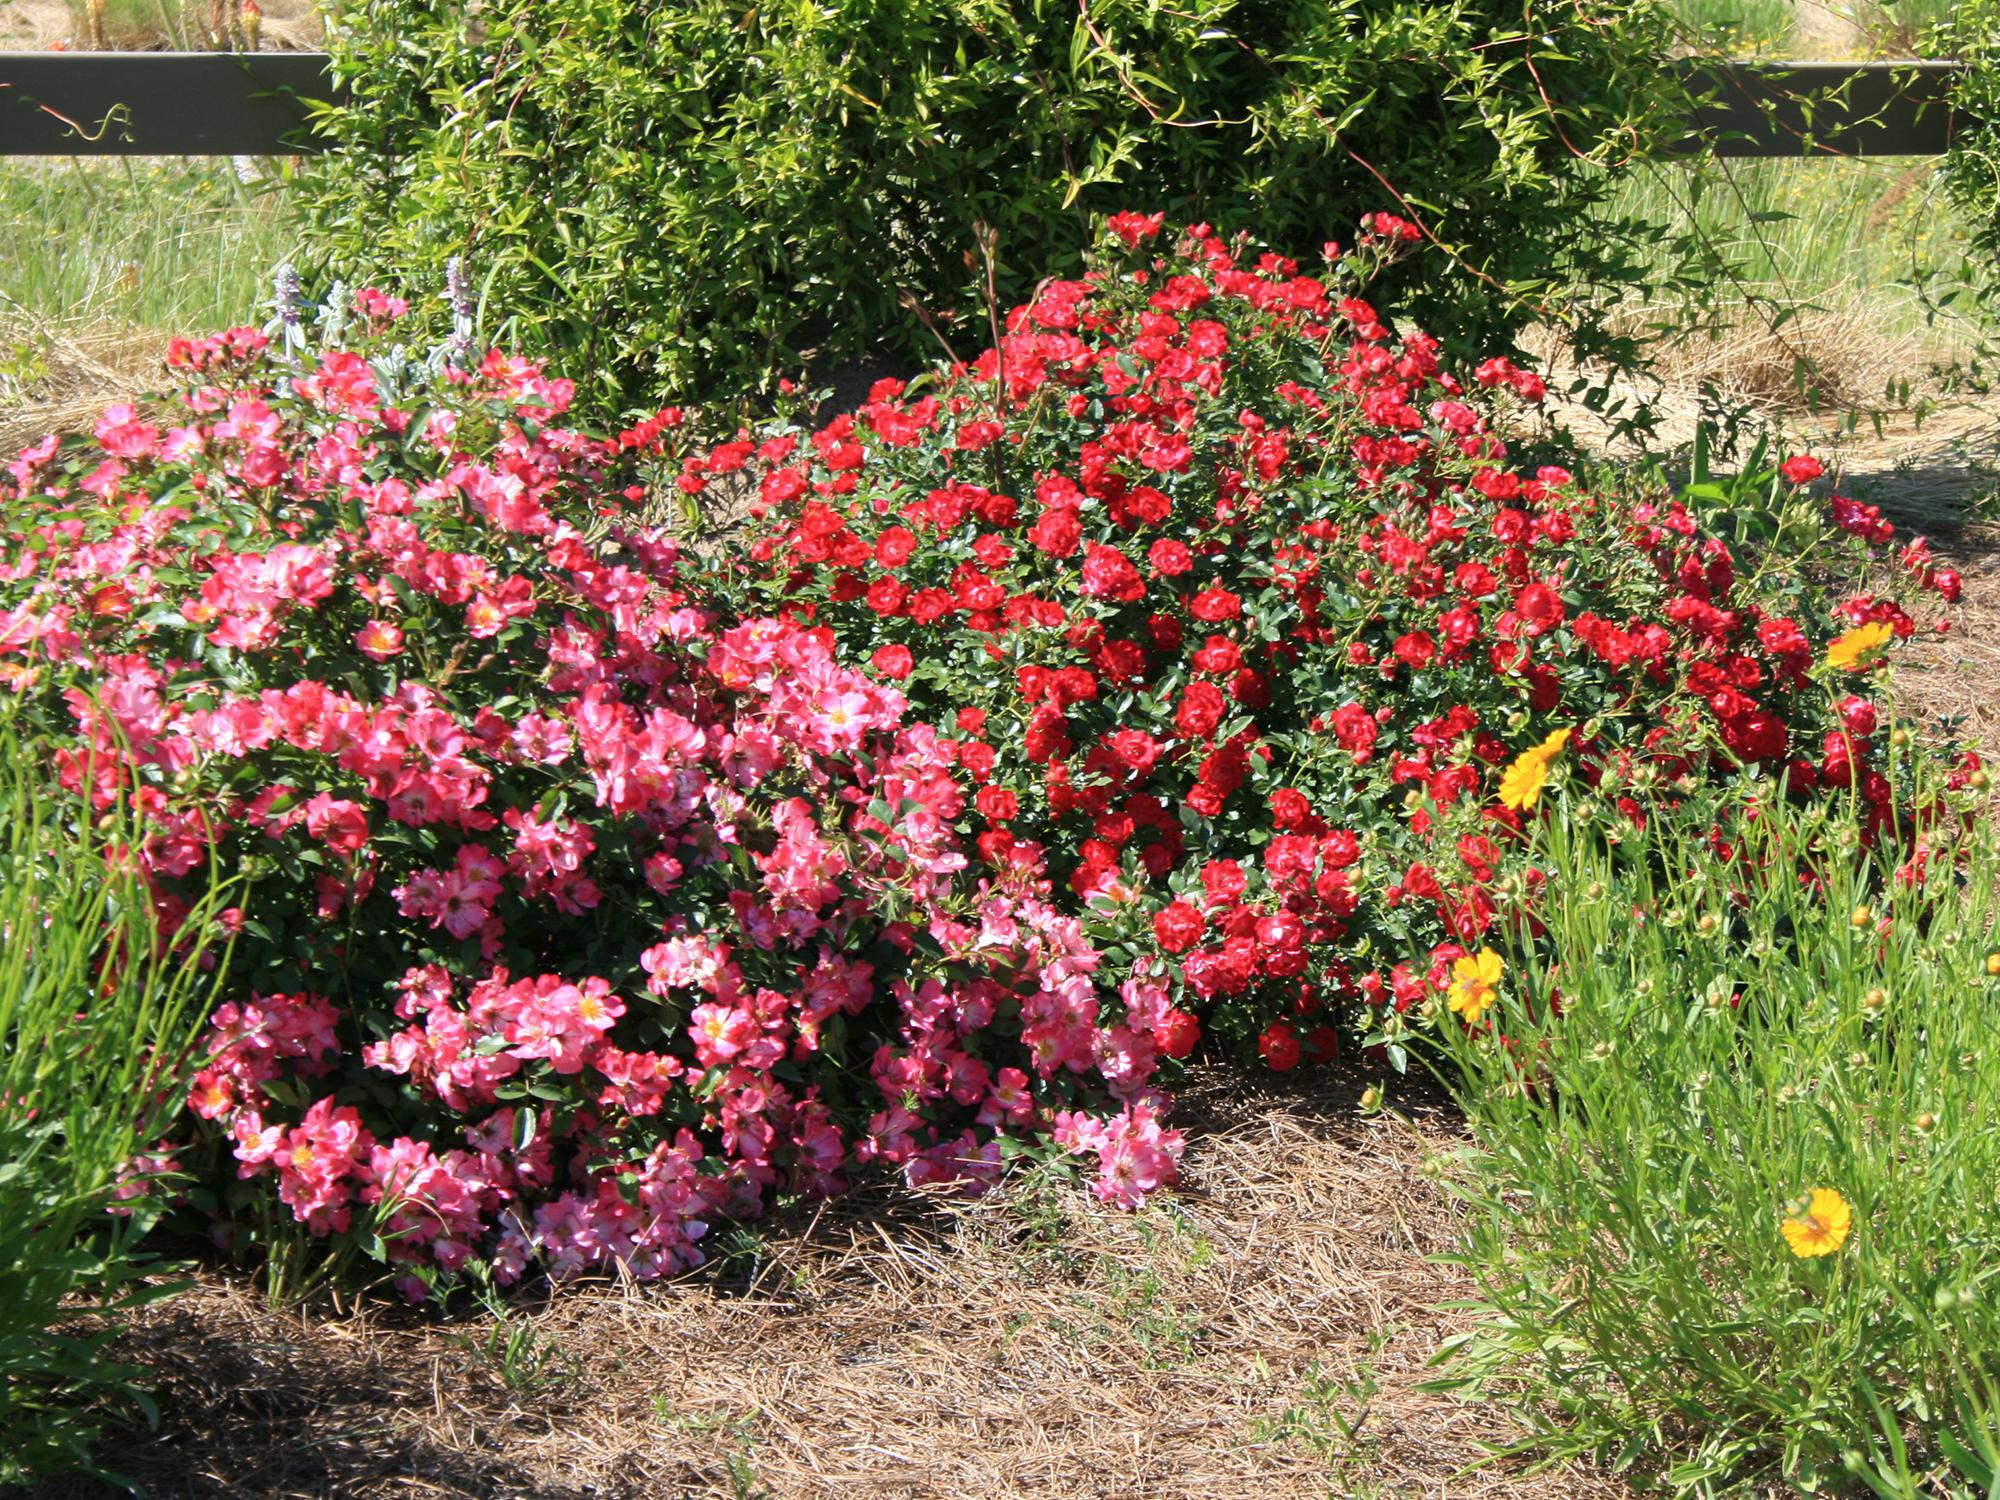 Drift roses, such as these pink and red selections, are lower-growing landscape roses that work great in small spaces, borders and even containers. (Photo by MSU Extension/Gary Bachman)